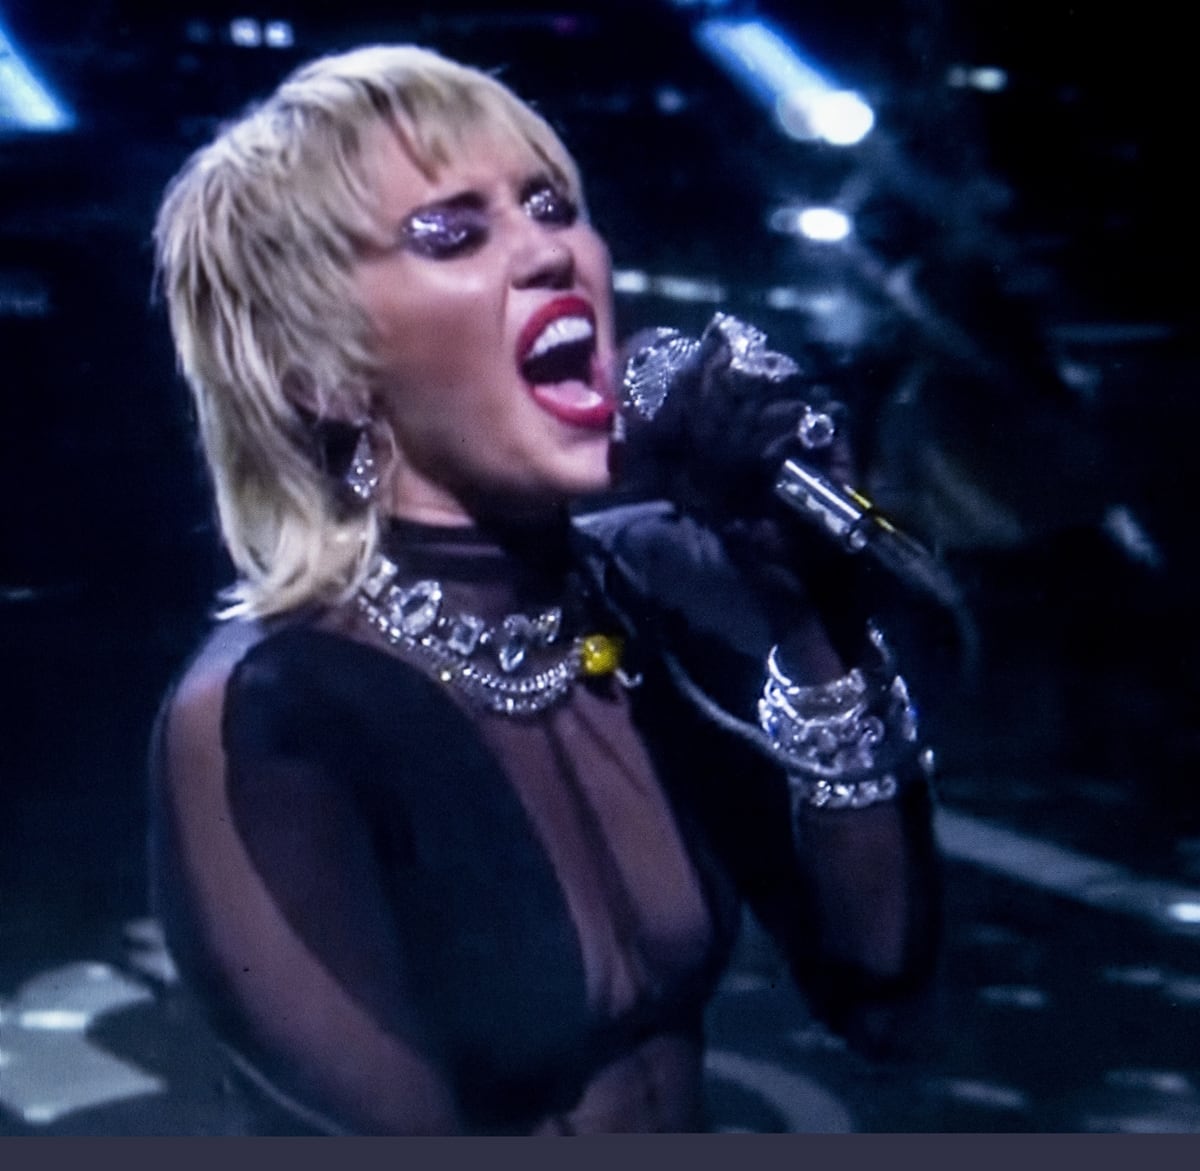 Miley Cyrus performs “Heart of Glass” live at the IHeartRadio Festival 2020